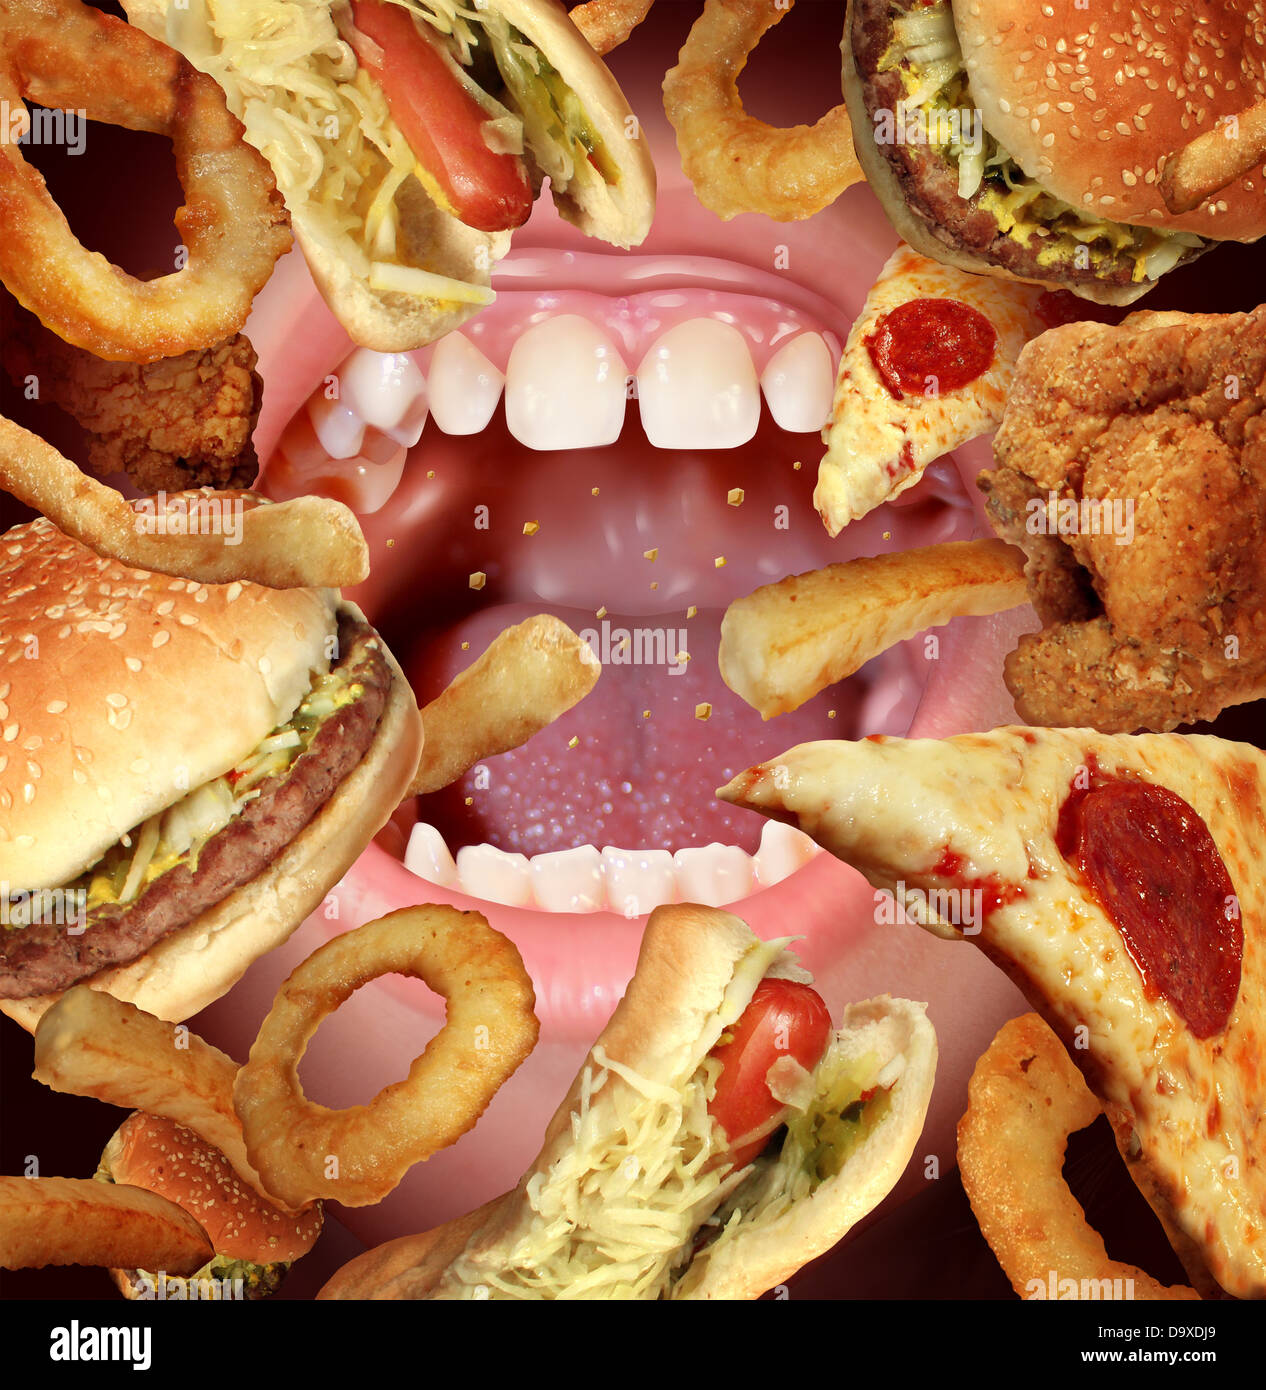 Eating problems and unhealthy diet struggling to follow healthy dieting as a health concept by the temptations of fried fast food as a hamburger hot dog french fries onion rings pizza with an opened hungry mouth. Stock Photo